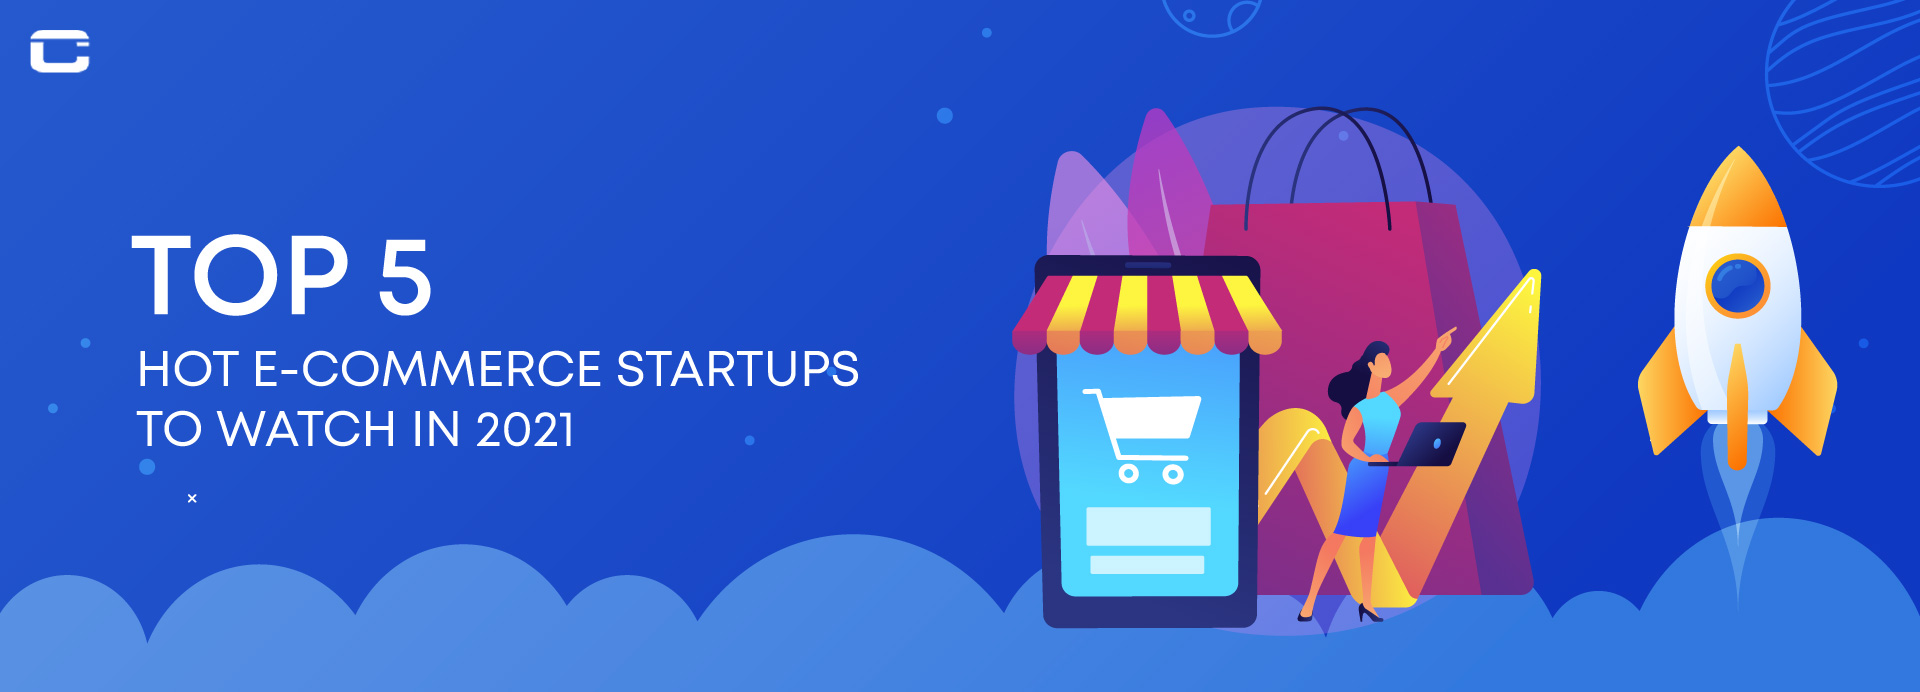 Top 5 Hot eCommerce Startups to watch in 2021